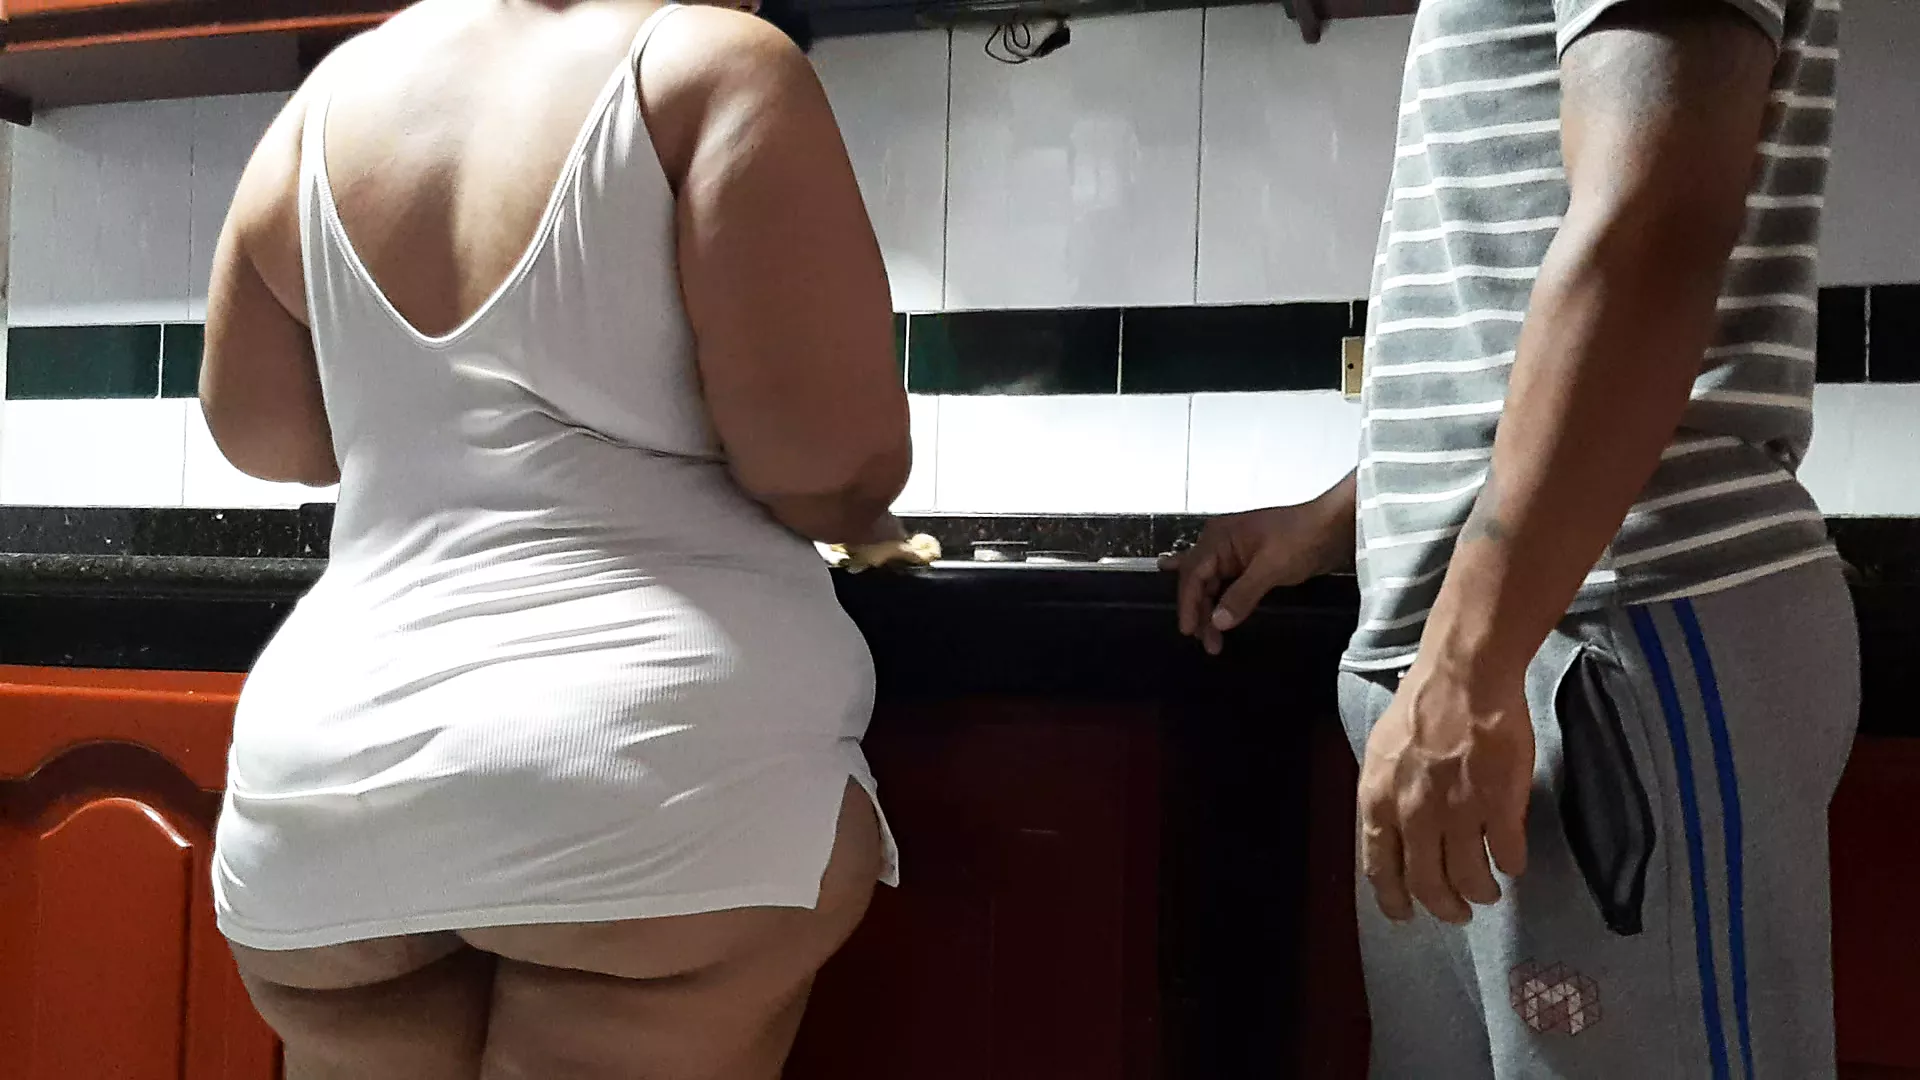 I found my best friends mom pantyless in the kitchen pic pic